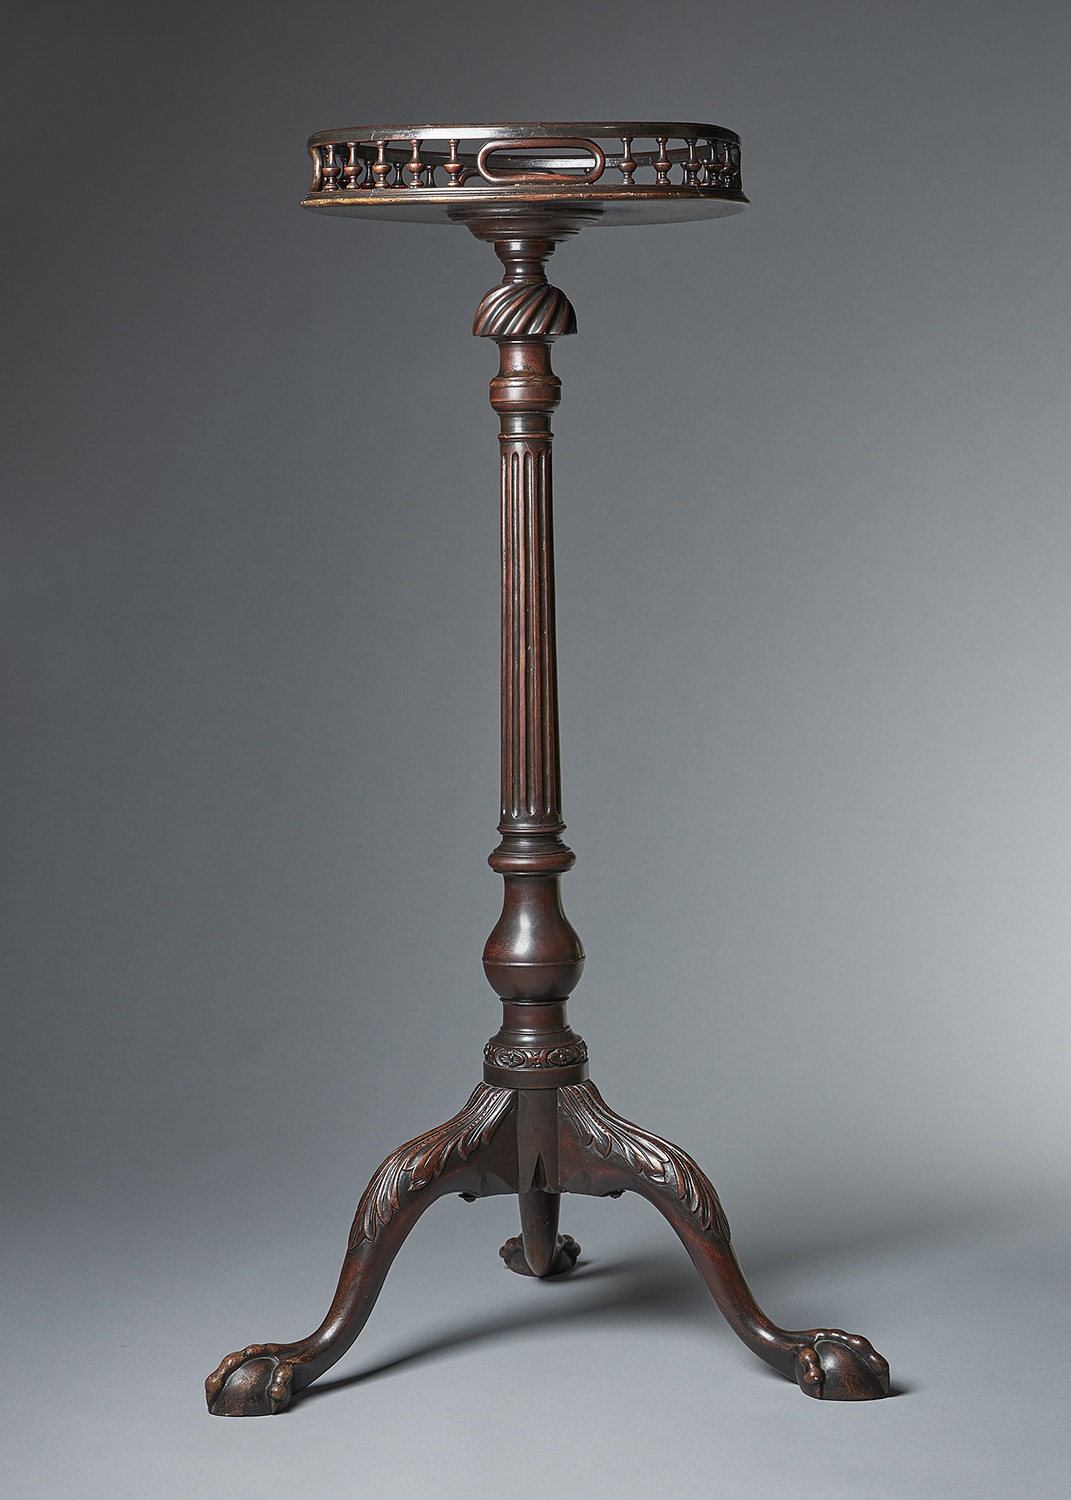 A Fine George II 18Th Century Chippendale Period Carved Mahogany Torchiere. Circa 1755-1765, England 4